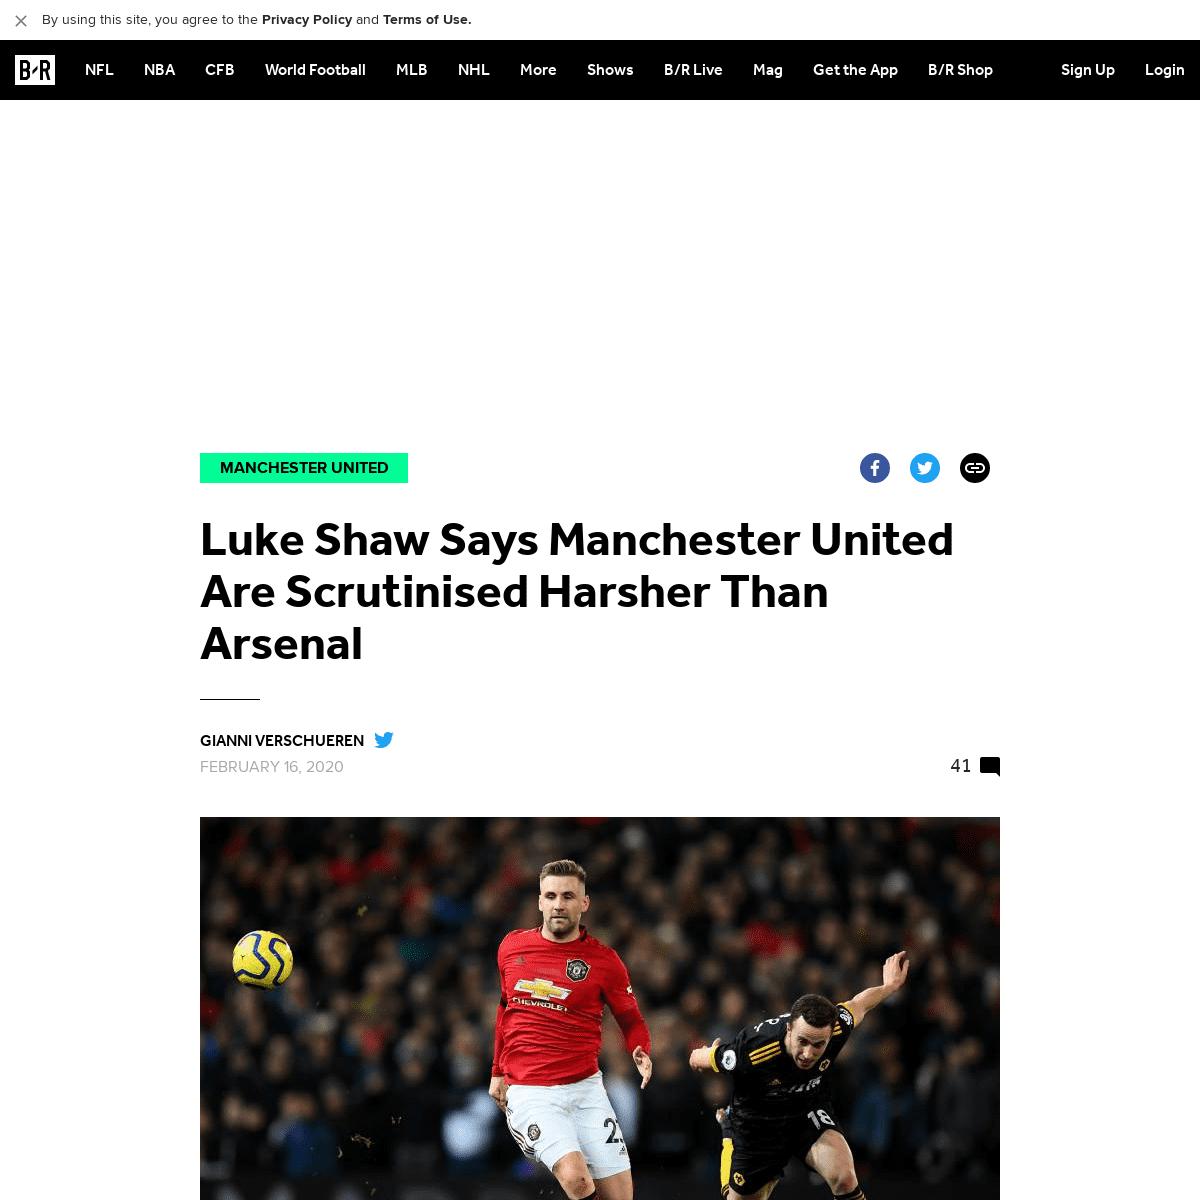 A complete backup of bleacherreport.com/articles/2876590-luke-shaw-says-manchester-united-are-scrutinised-harsher-than-arsenal